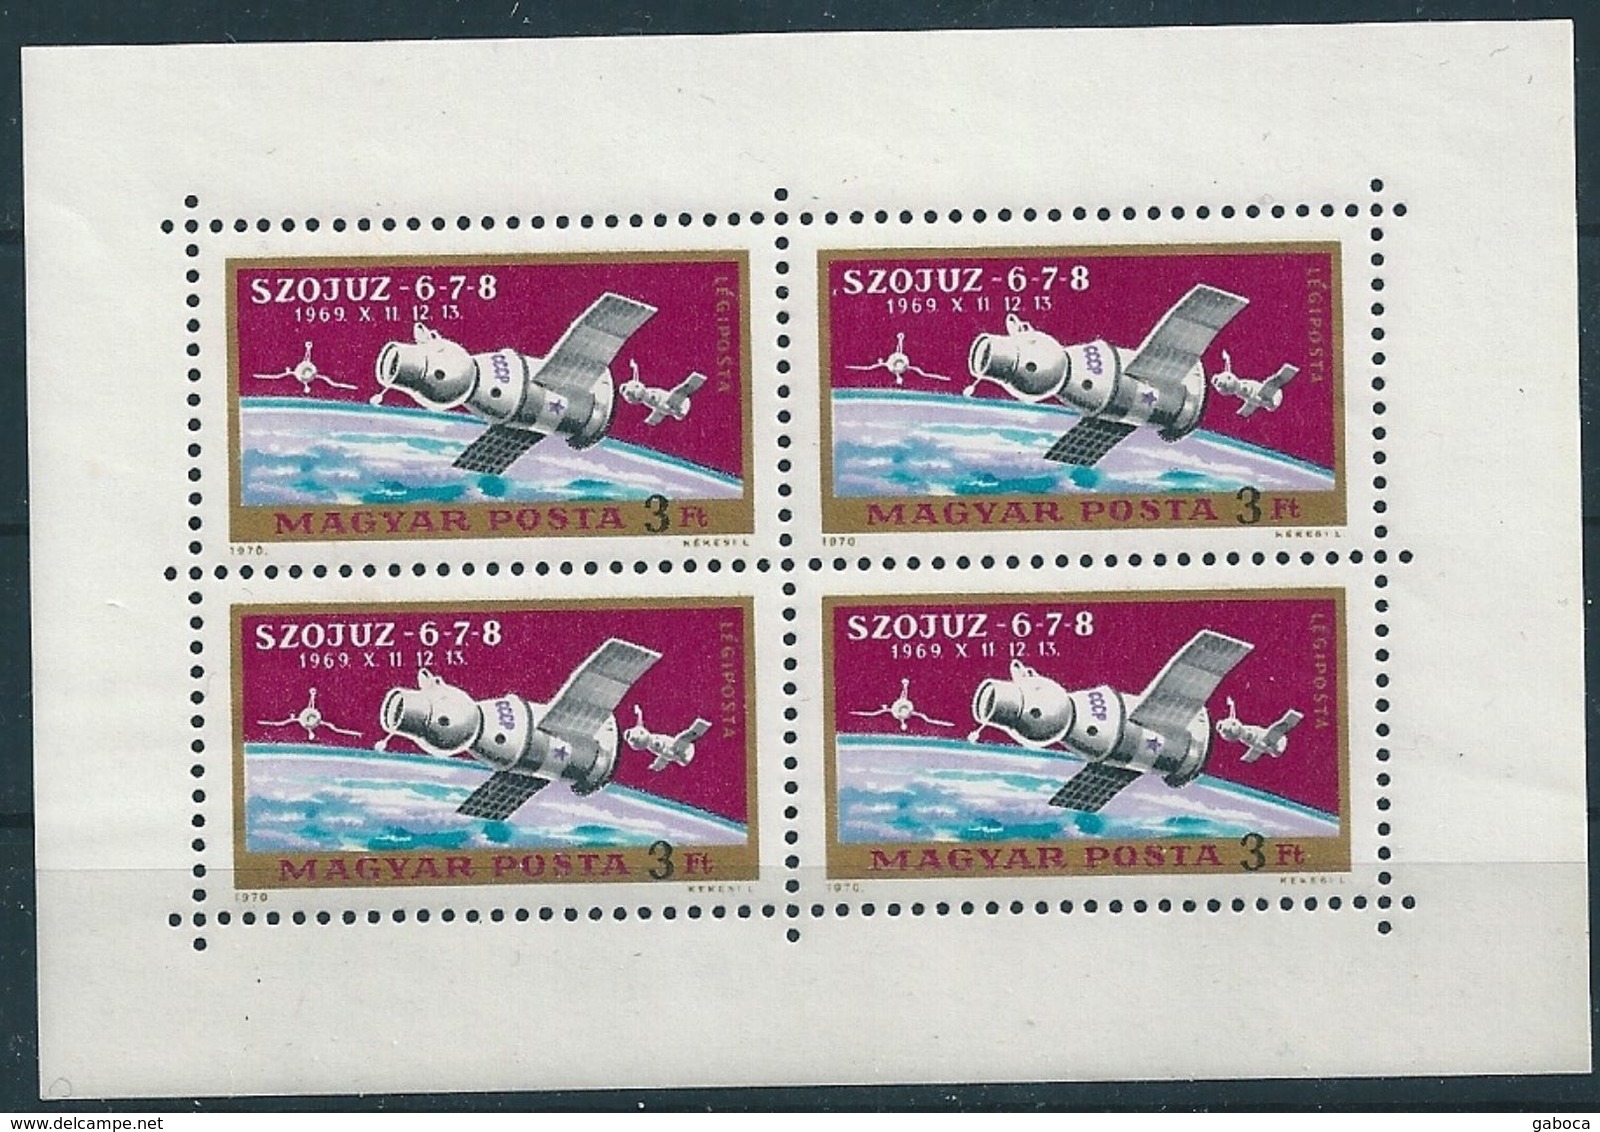 B0572 Hungary Space USSR Soyuz-6-7-8 Spaceship Small List MNH - Unused Stamps